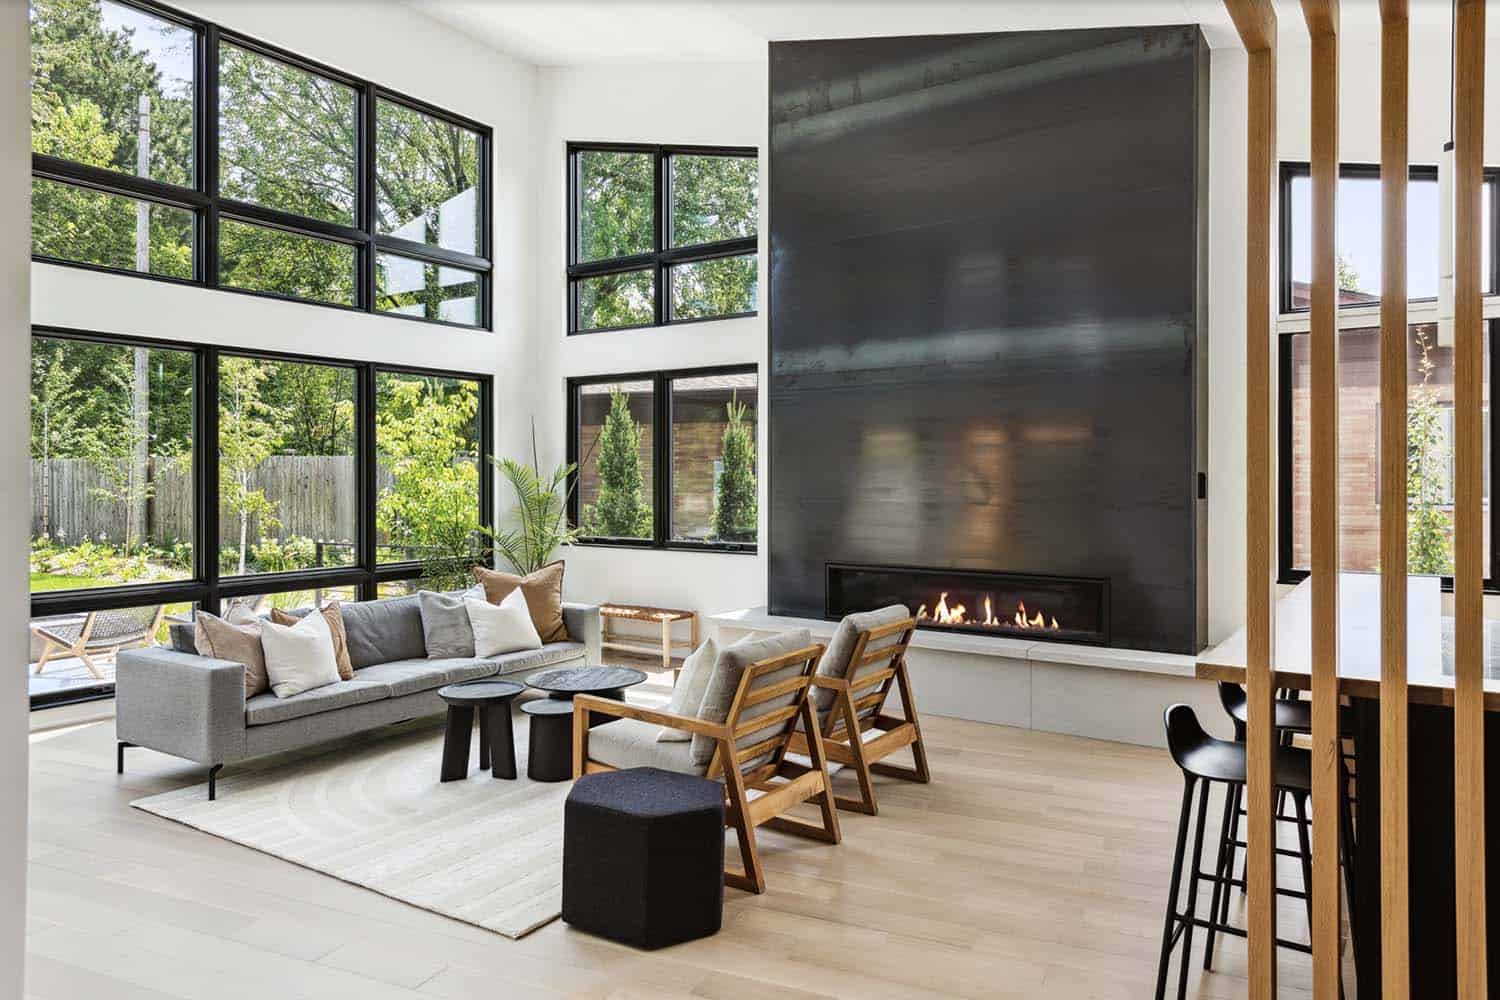 A waterfront home in Rye, New York gets a masculine yet inviting refresh